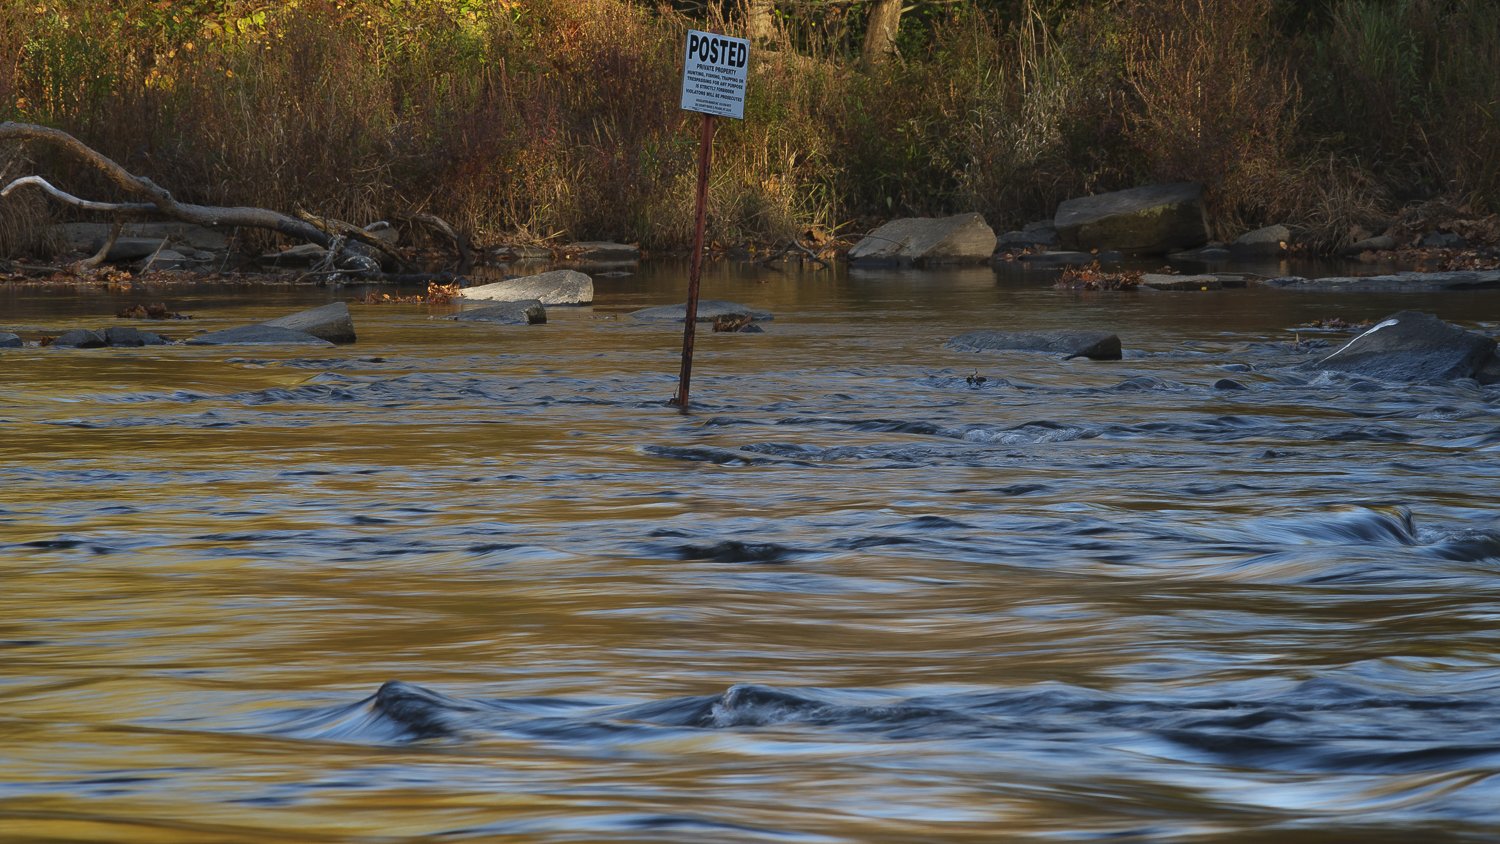  A no trespassing sign, as seen on the river, at the entrance to the Douglaston Salmon Run, which is owned by the Barclay Family.  It’s technically legal to take a boat through this section of the river, but if the boat touches a rock or the bottom a